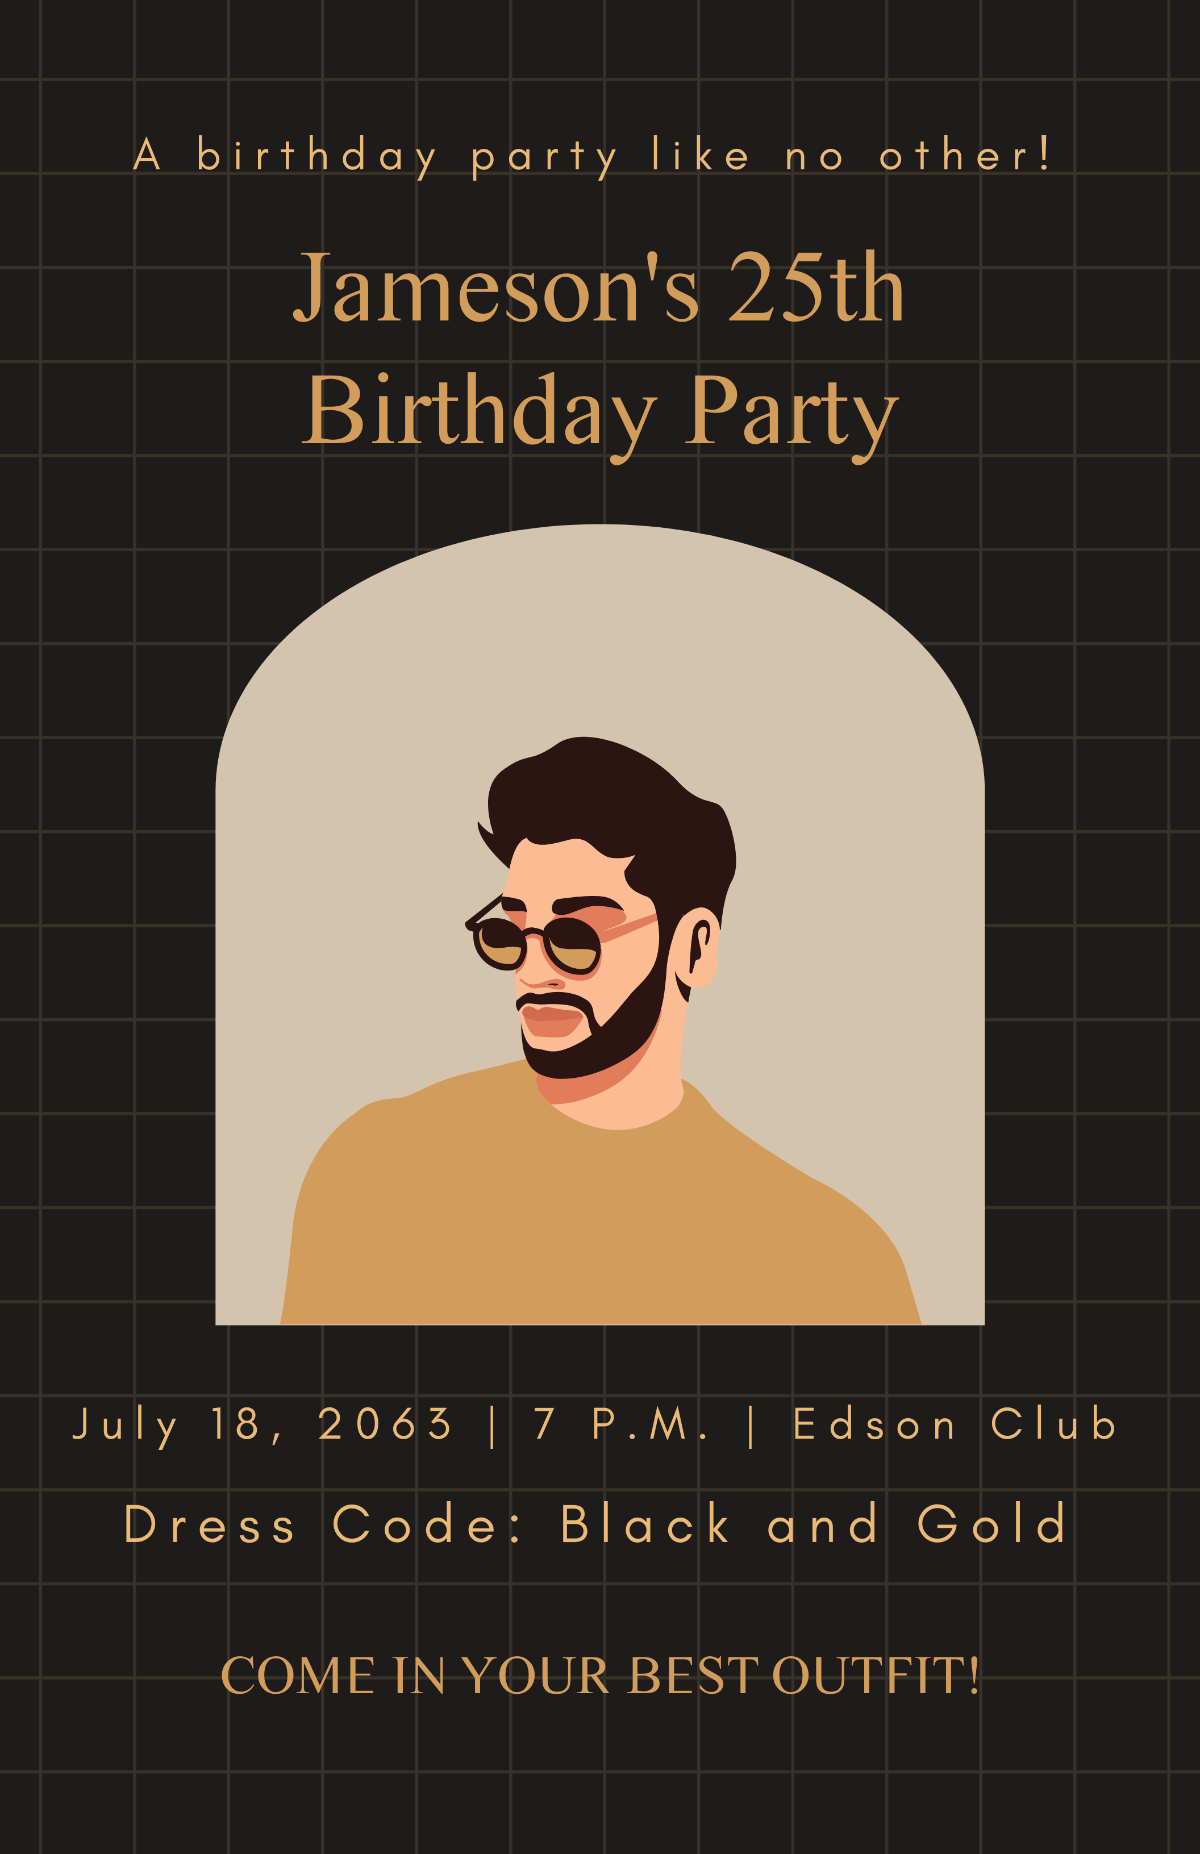 Birthday Party Poster